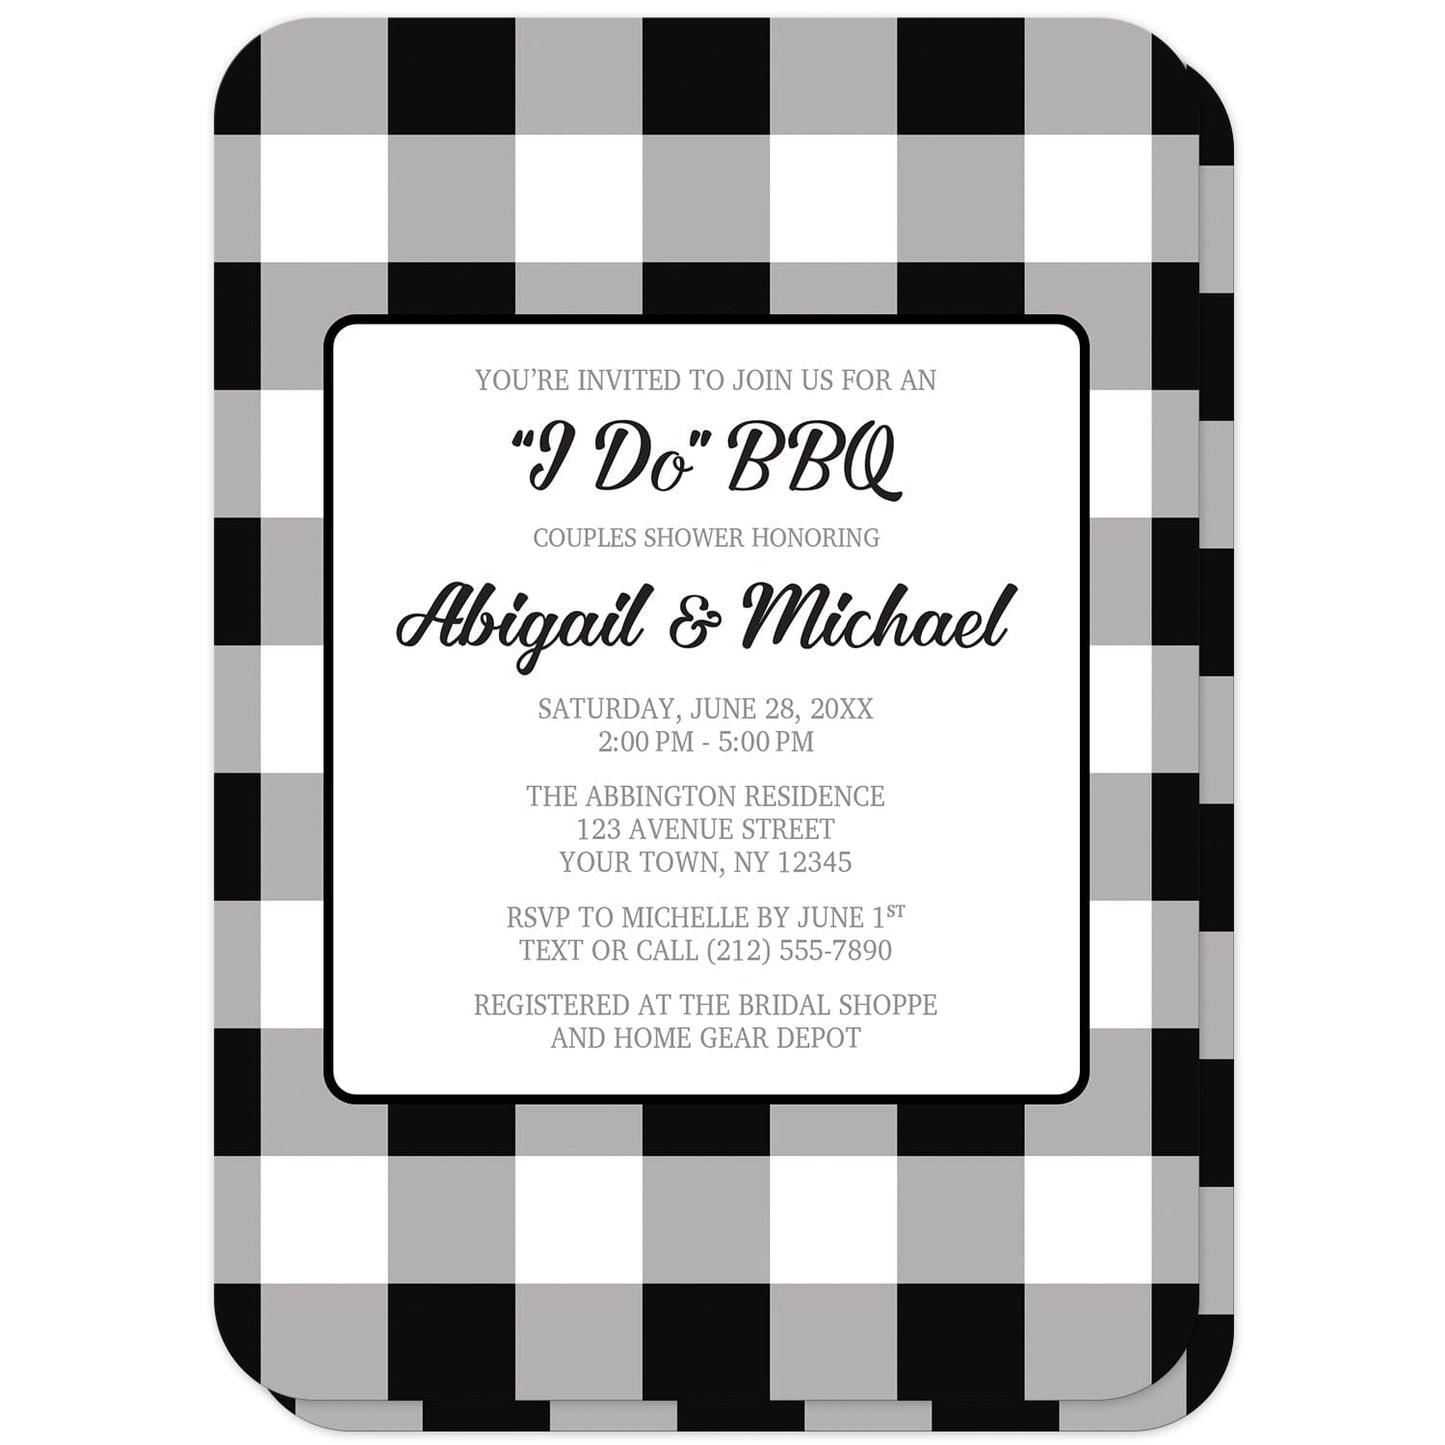 Black and White Buffalo Plaid I Do BBQ Couples Shower Invitations (with rounded corners) at Artistically Invited. Invites with a large black and white buffalo plaid (buffalo check) pattern background. Your personalized couples shower celebration details are custom printed in black and gray inside a white rectangular area in the middle over the buffalo plaid background. The back side of these invites are printed with the same pattern as the front side.